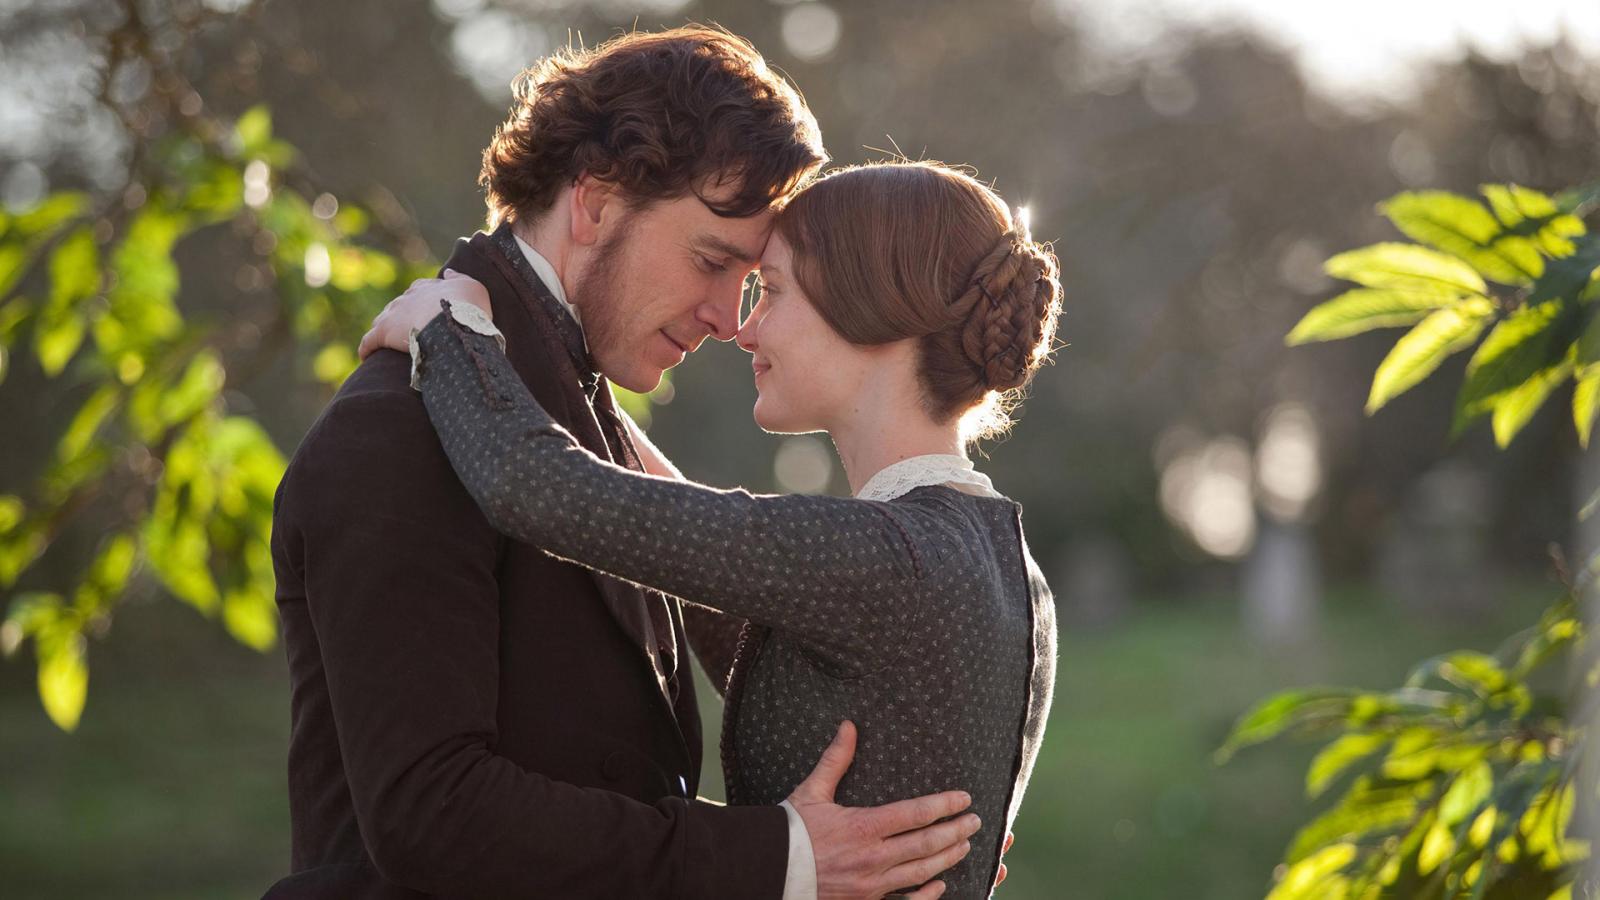 15 Historical Dramas that Capture the Pride and Prejudice Vibe - image 12